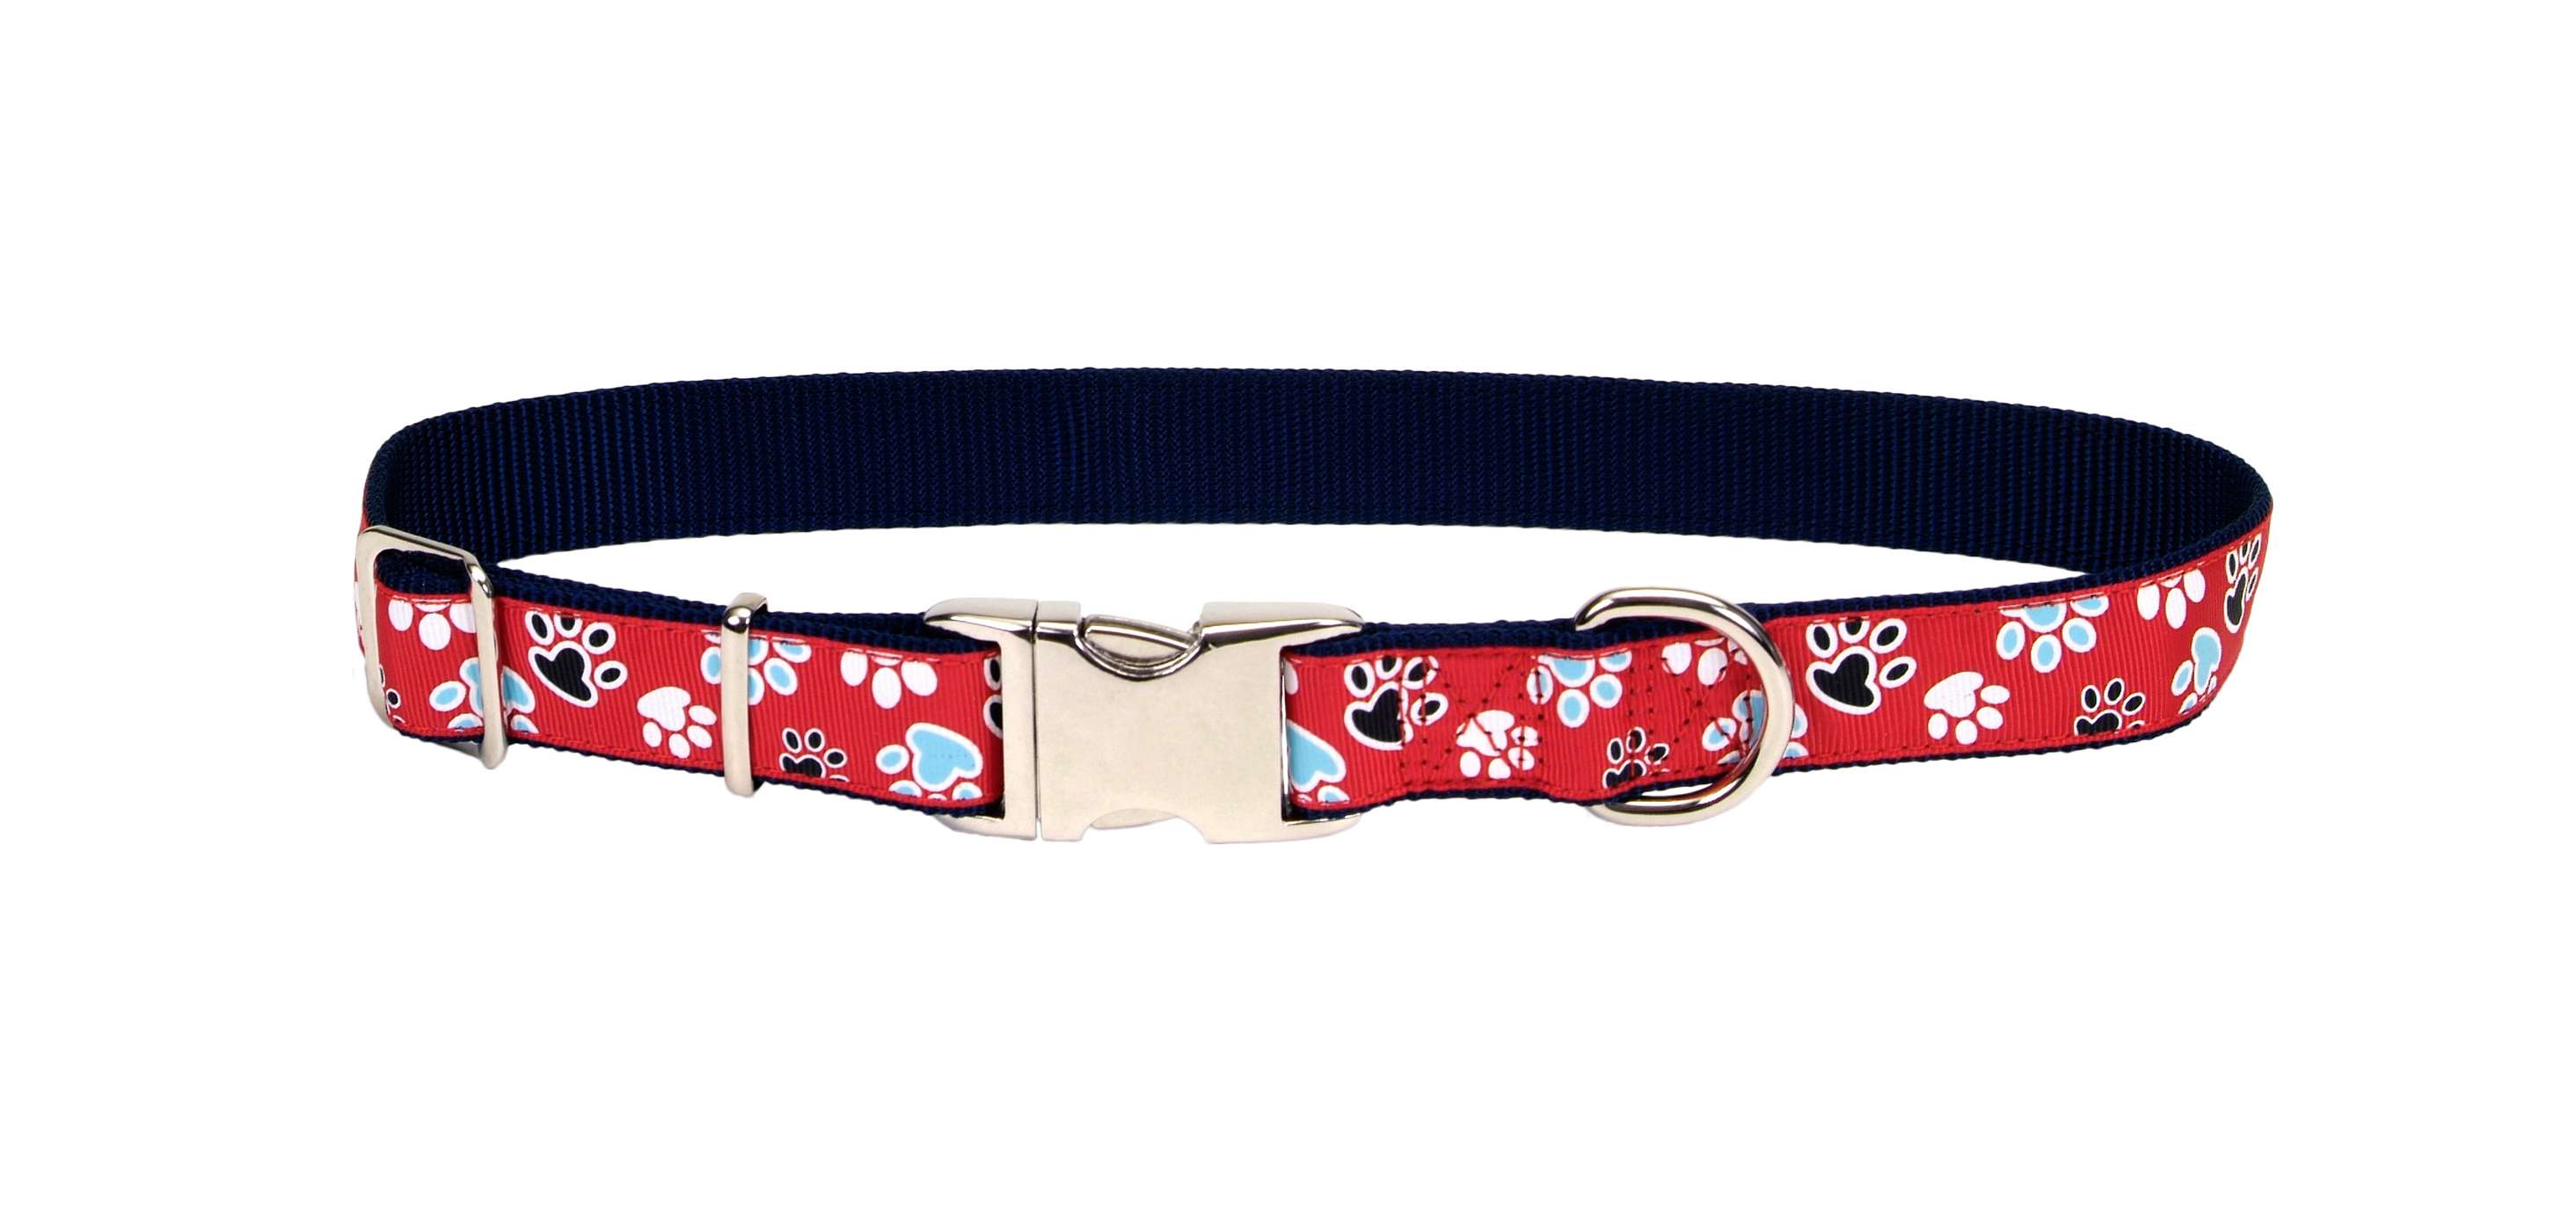 Coastal Pet Products 5/8 Inch Adjustable Nylon Collar with Red Paws Ribbon; image 2 of 2